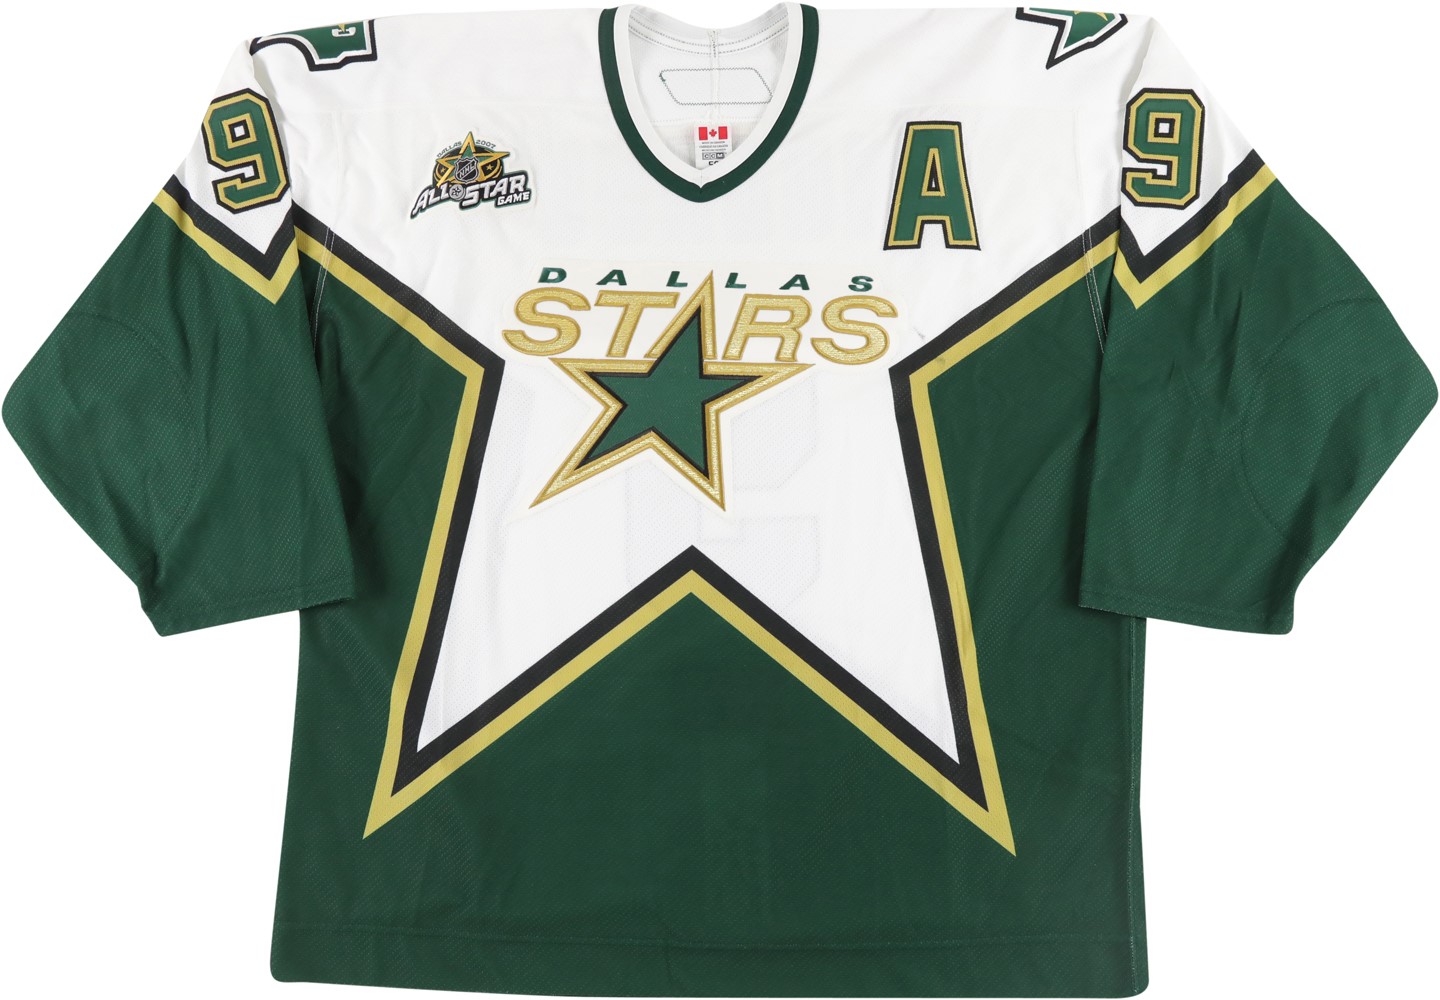 Hockey - 3/17/07 Mike Modano Record Breaking 502nd and 503rd Goal Game Worn Jersey - Passes Joe Mullen for Most Goals by American Born Player (MeiGray & Photo-Matched)